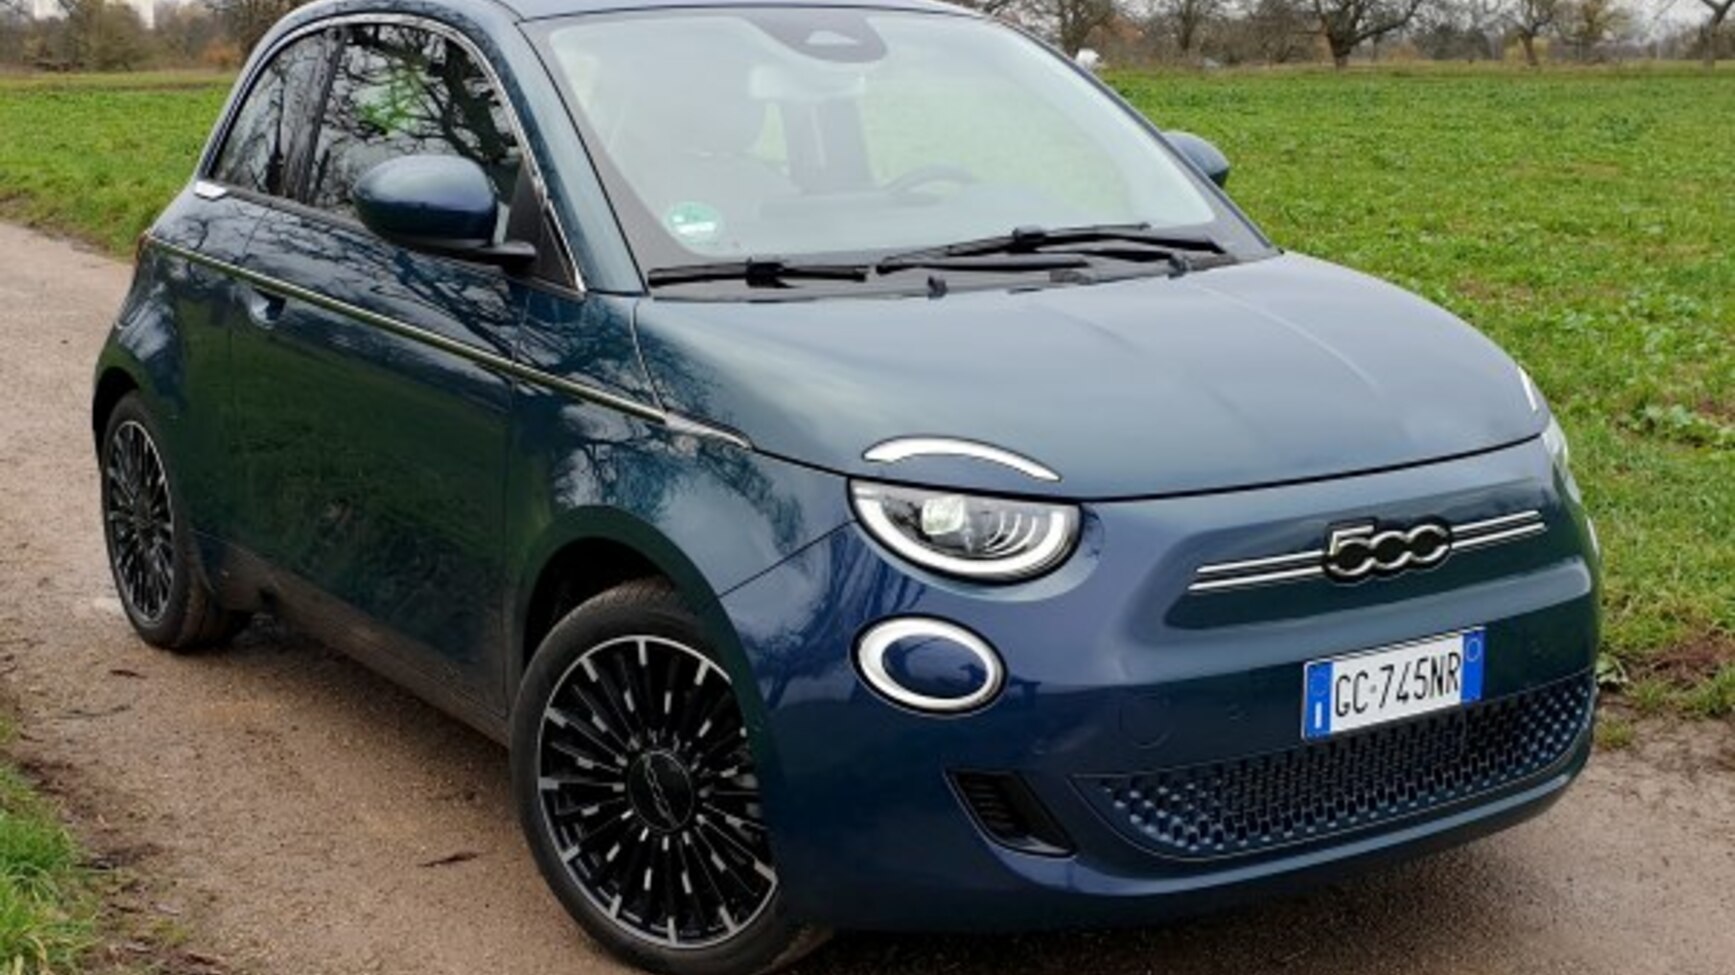 Fiat New 500e 23.8 kWh (95 Hp) 2020, 2021 